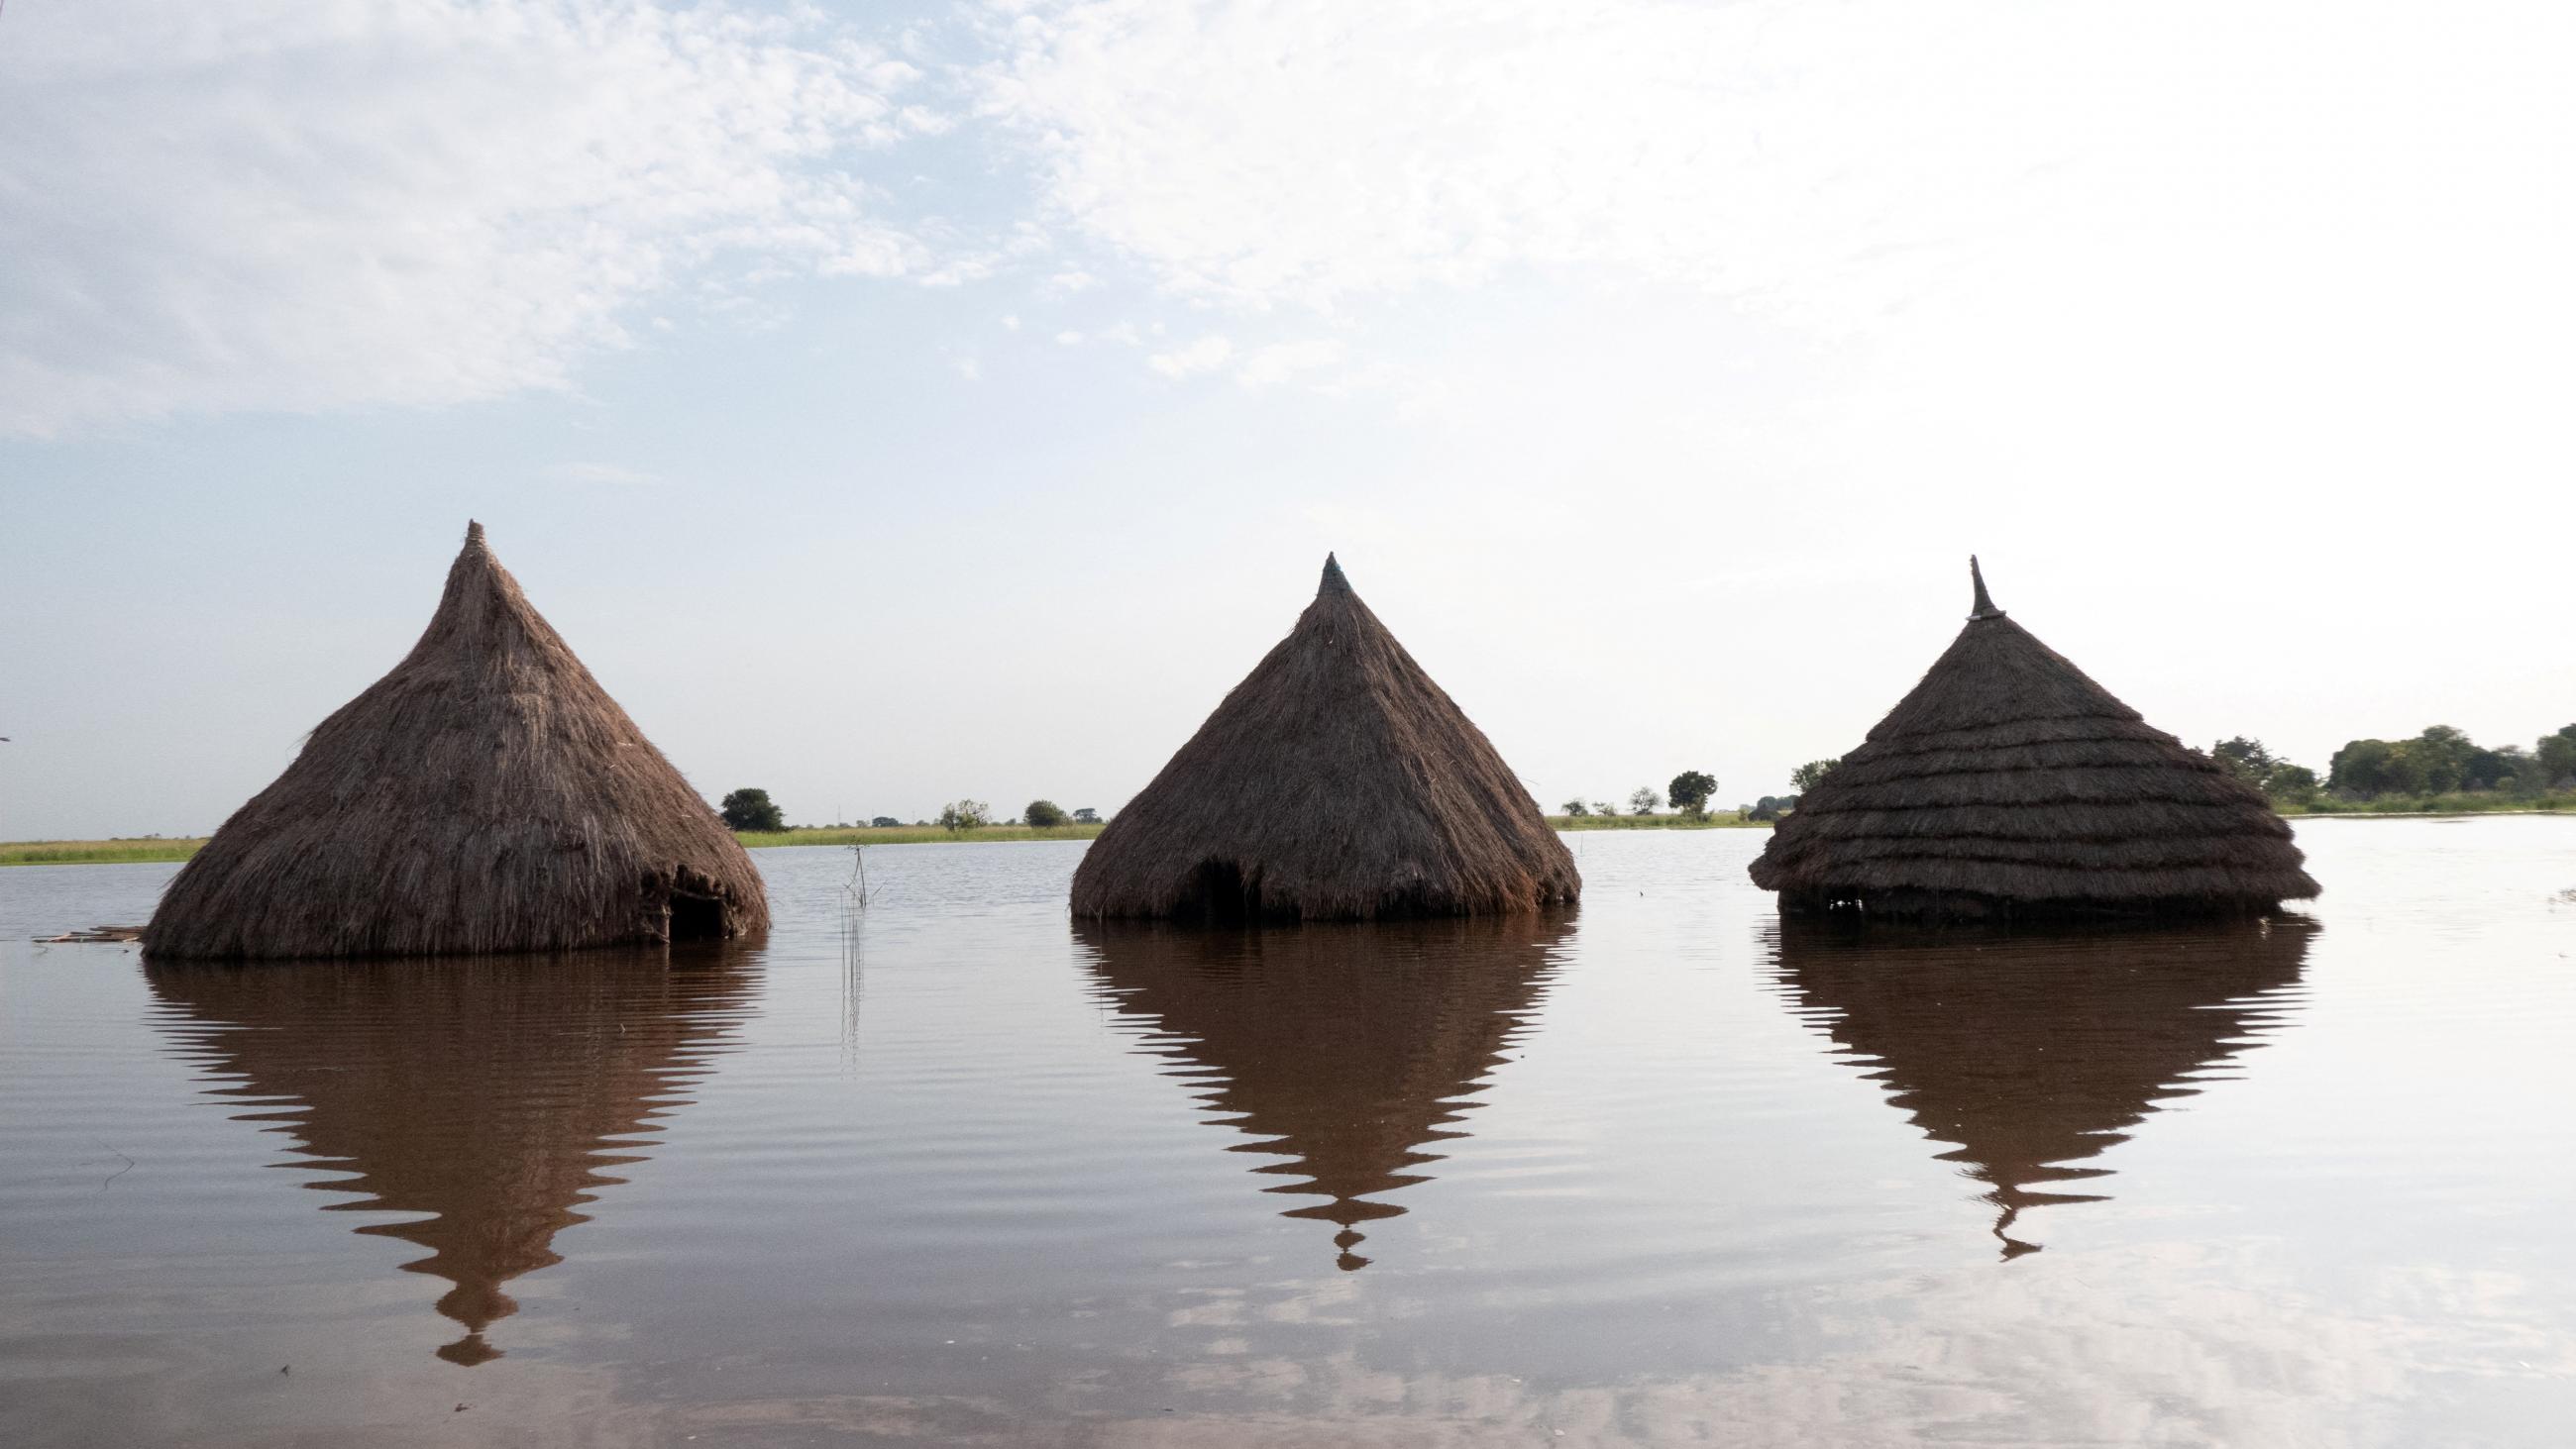 A view shows houses submerged in flood waters in Baar, Rubkona, Unity State, South Sudan as seen in this image taken by Doctors Without Borders (MSF) on November 27, 2021